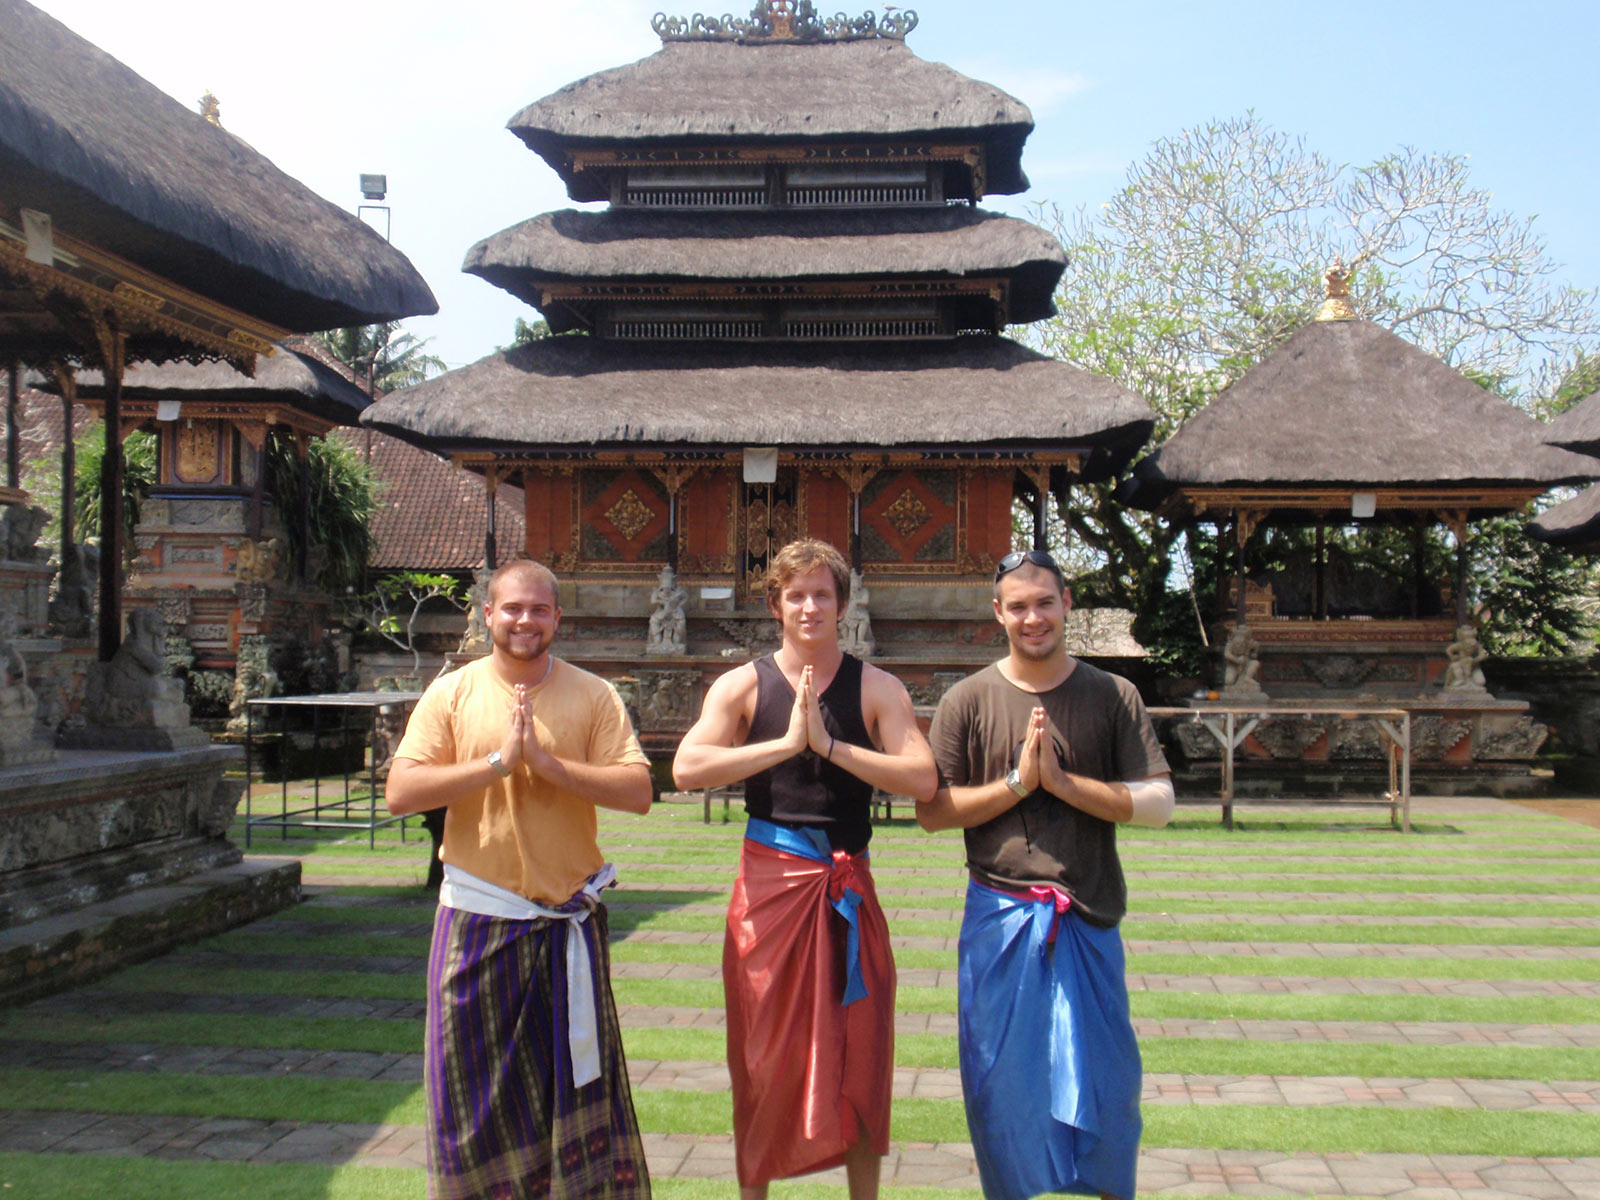 David Simpson with two guys at a temple in Bali. My first taste of Asia